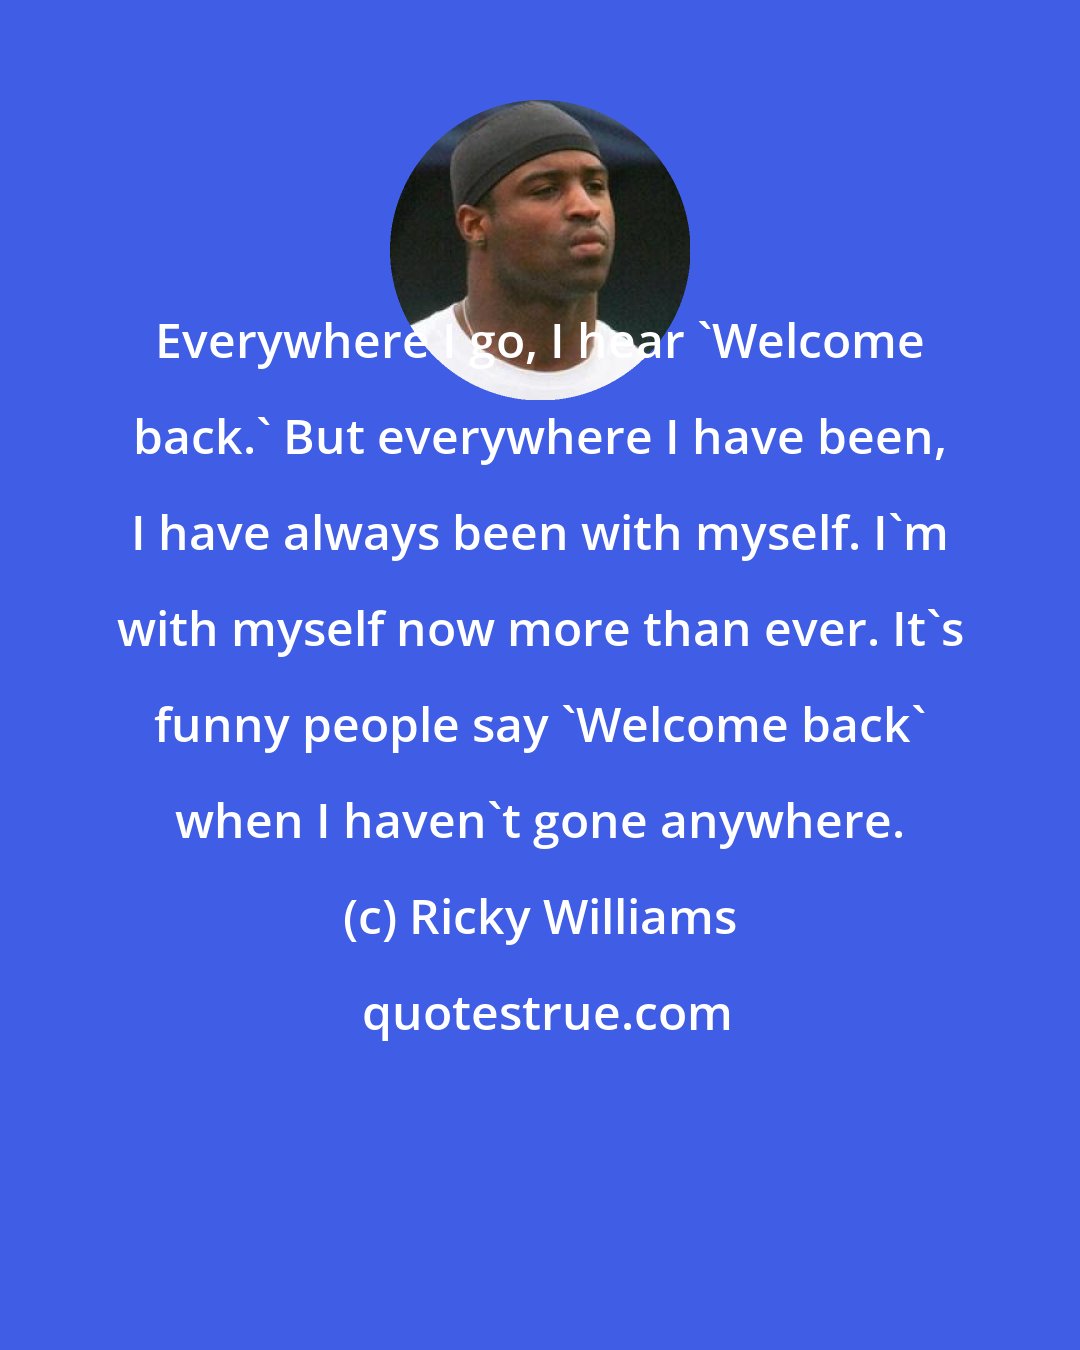 Ricky Williams: Everywhere I go, I hear 'Welcome back.' But everywhere I have been, I have always been with myself. I'm with myself now more than ever. It's funny people say 'Welcome back' when I haven't gone anywhere.